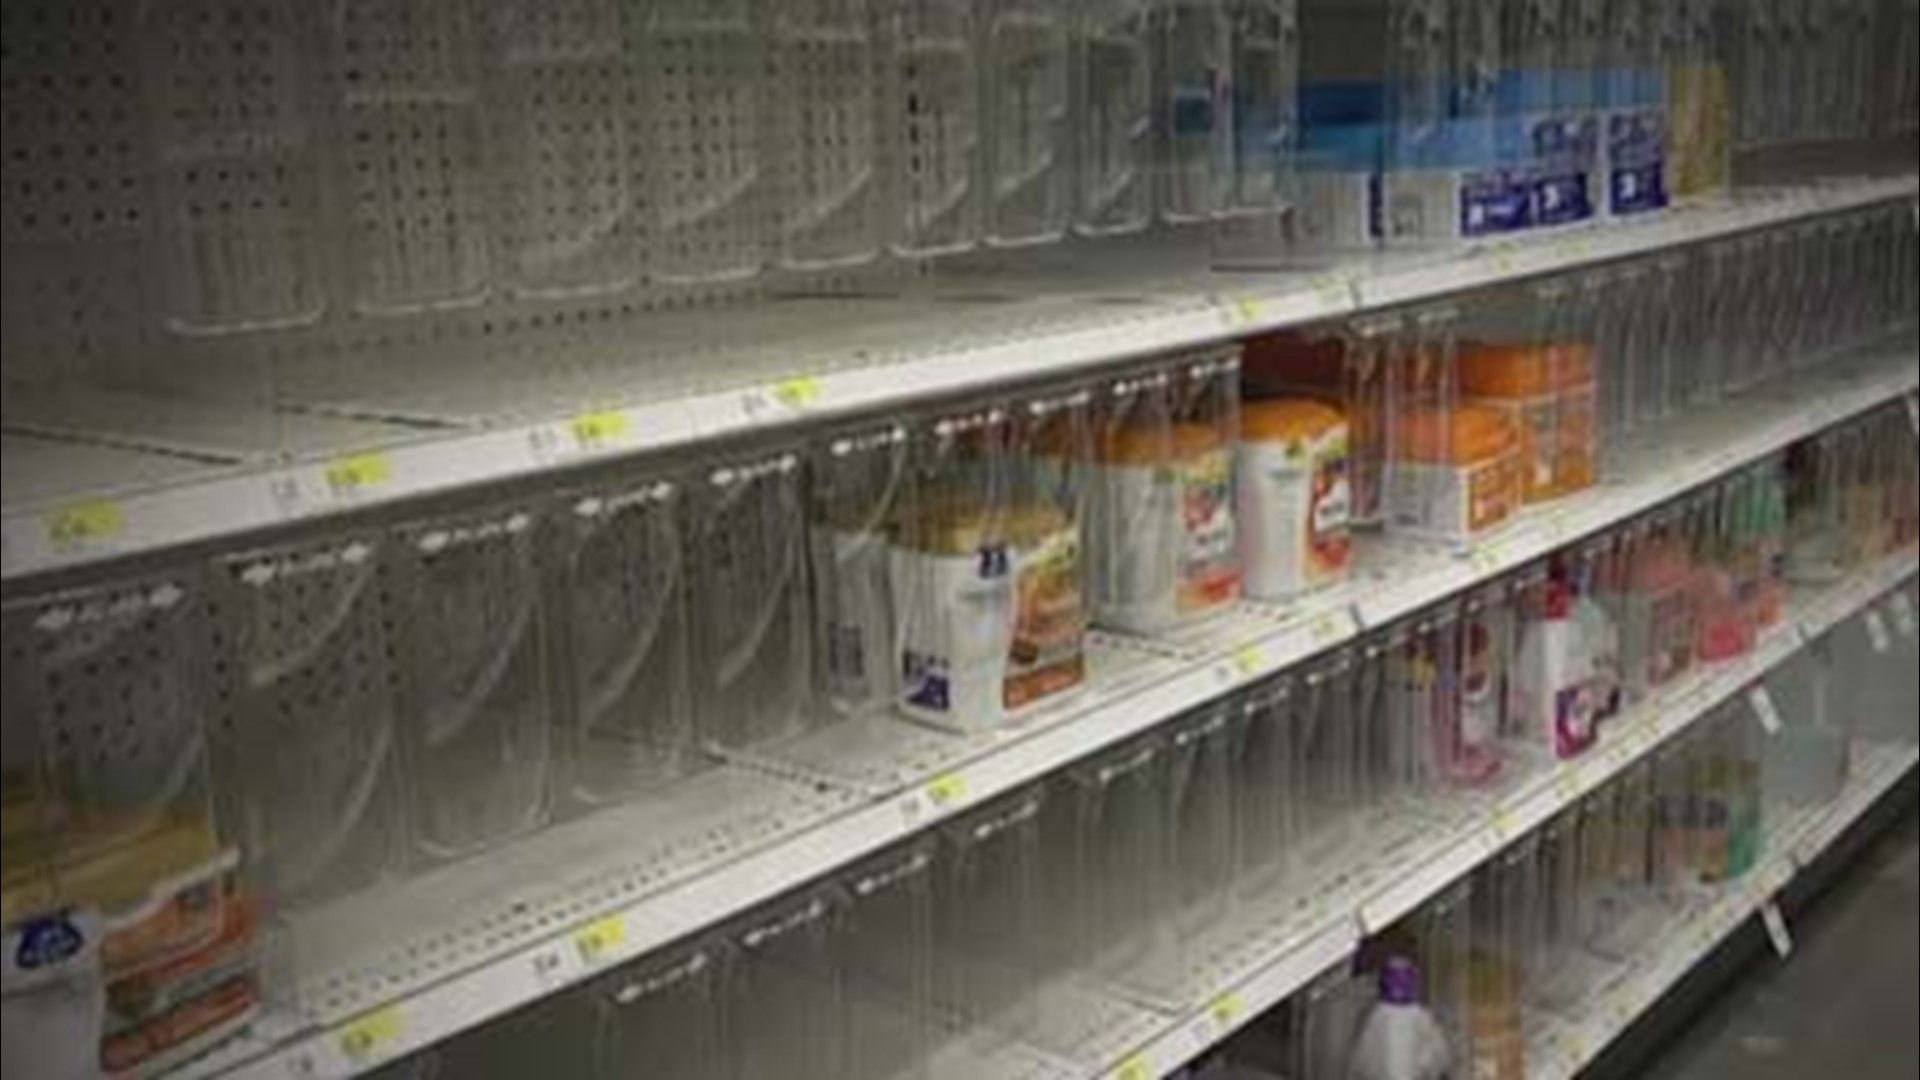 A nationwide shortage coupled with a massive baby formula recall led to empty store shelves -- and worried parents.